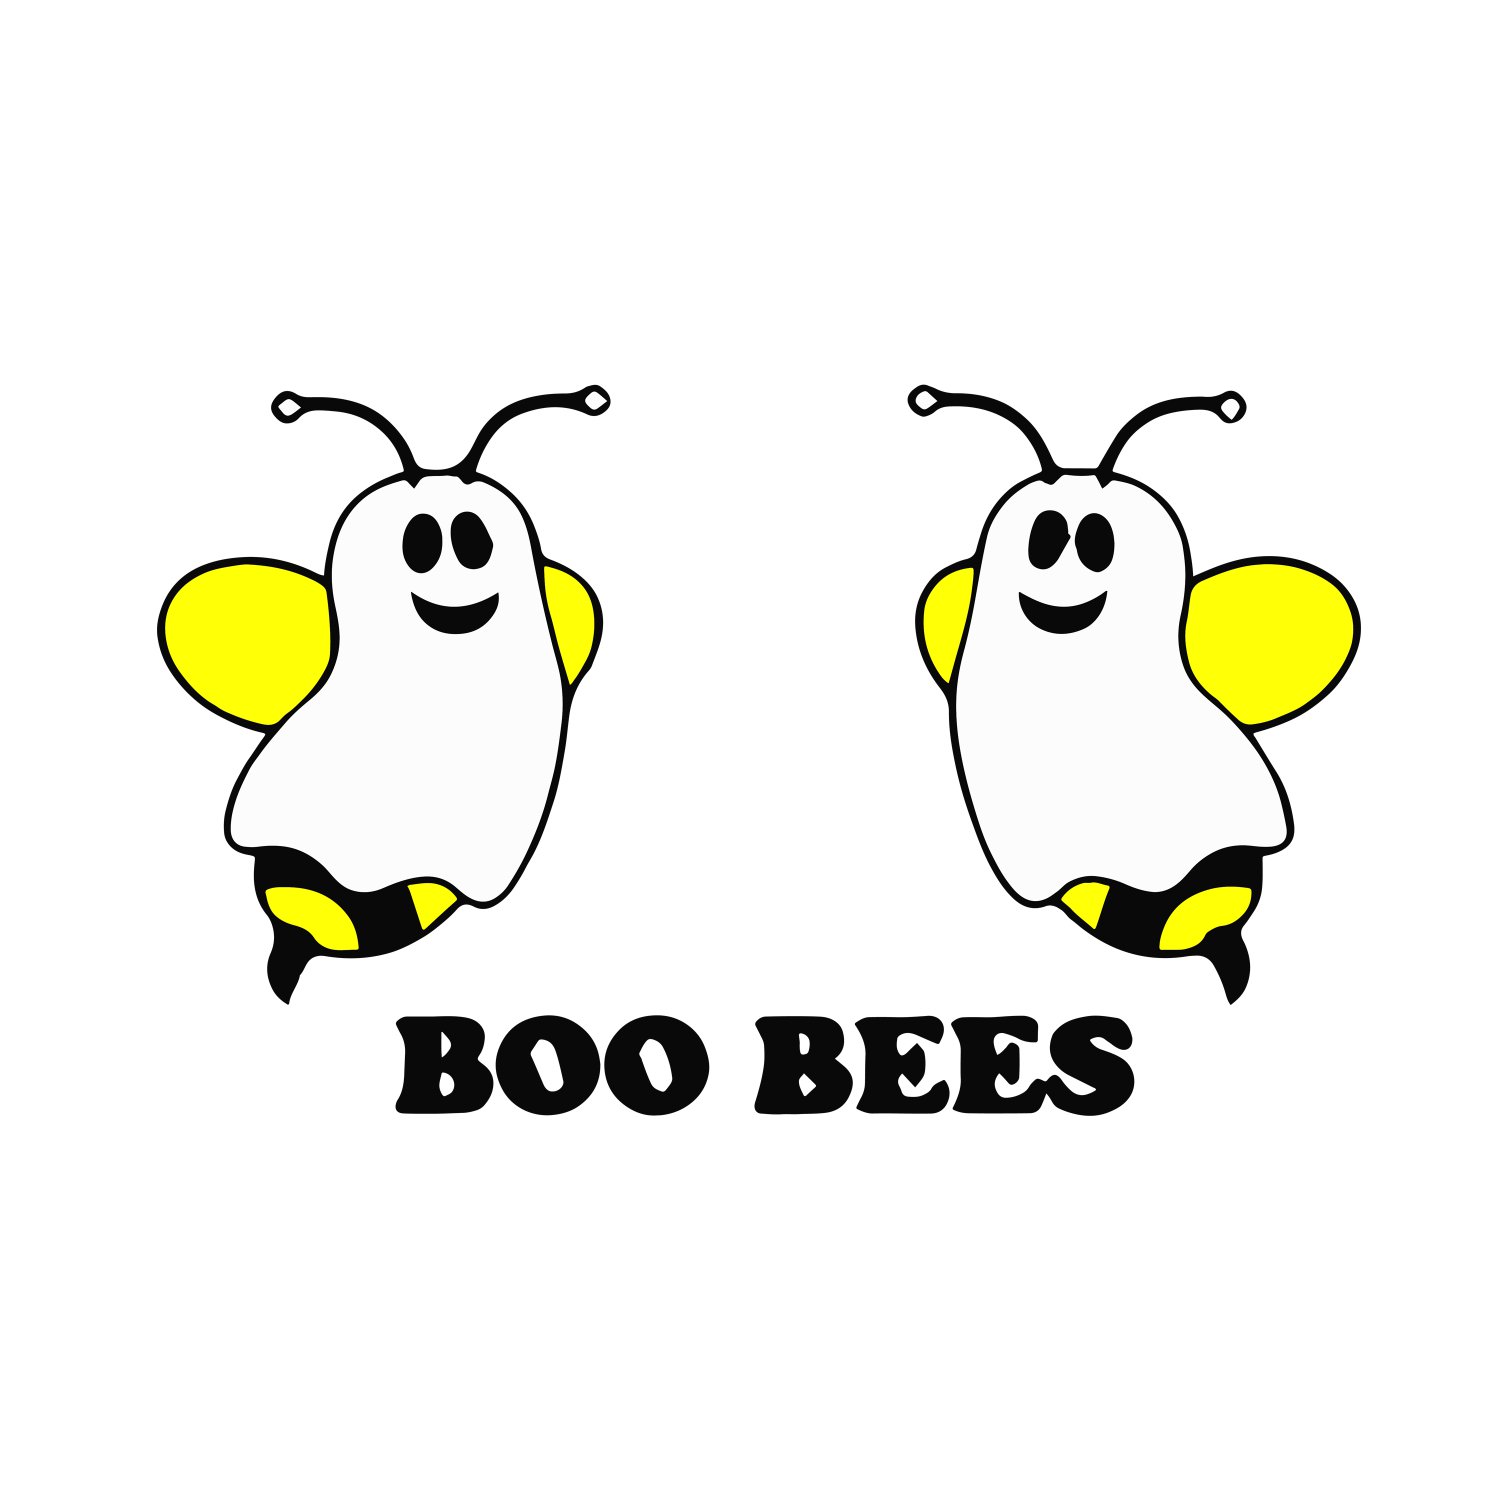 Download Boo bees svg,boo bees,boo bees png,boo boo crew,boo boo ...